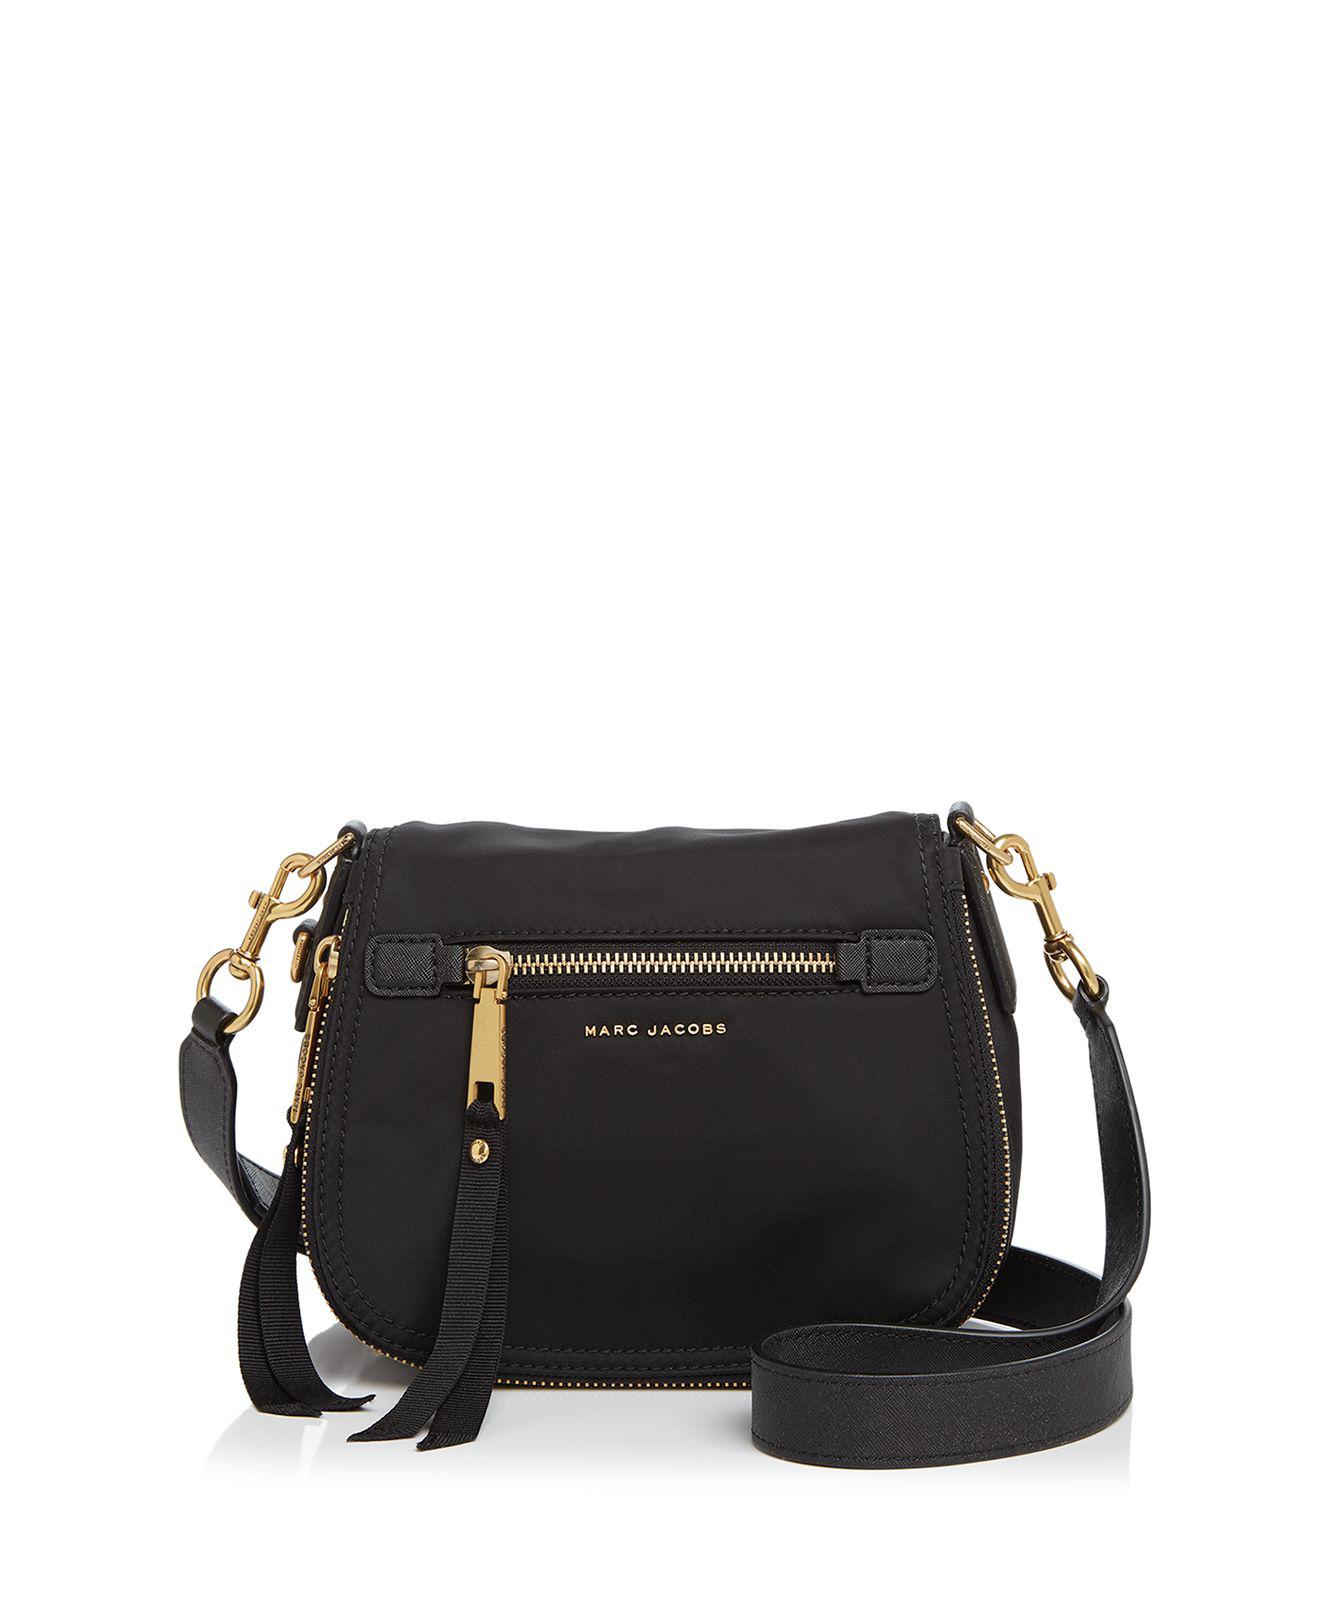 Marc Jacobs Trooper Nomad Small Nylon Saddle Bag in Black | Lyst